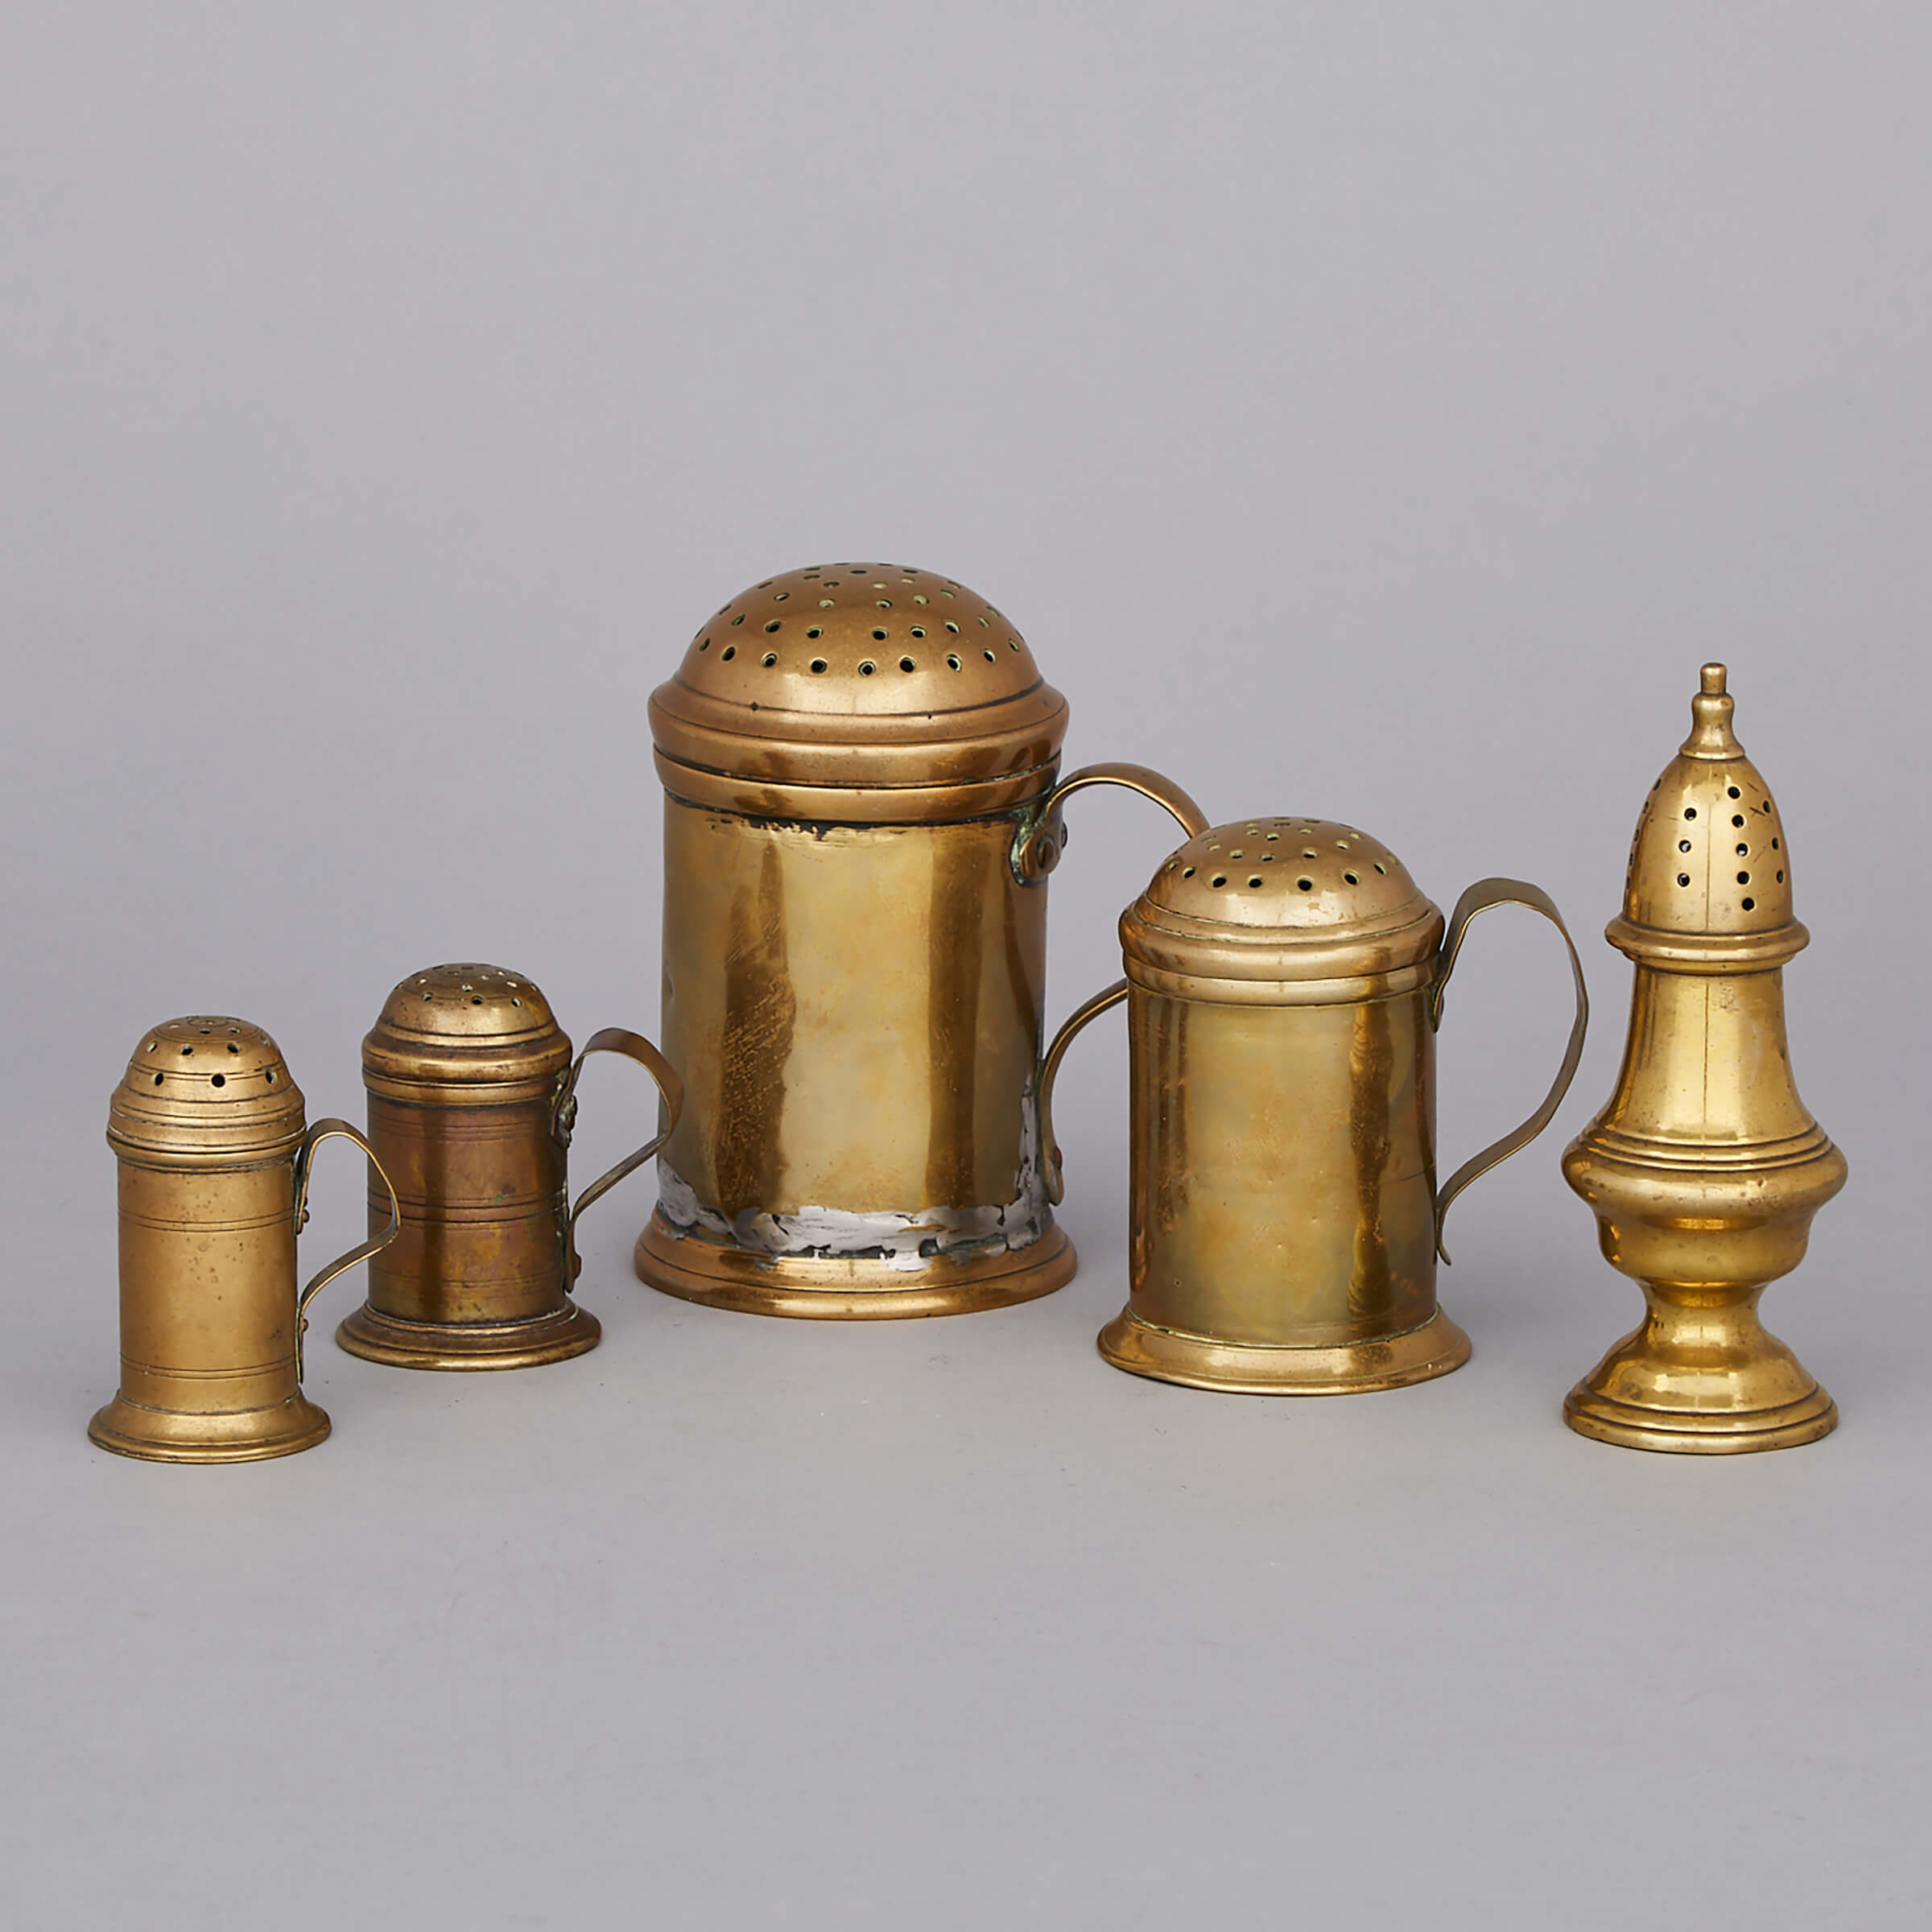 Four English Brass Dredgers and a Castor, mid 18th century